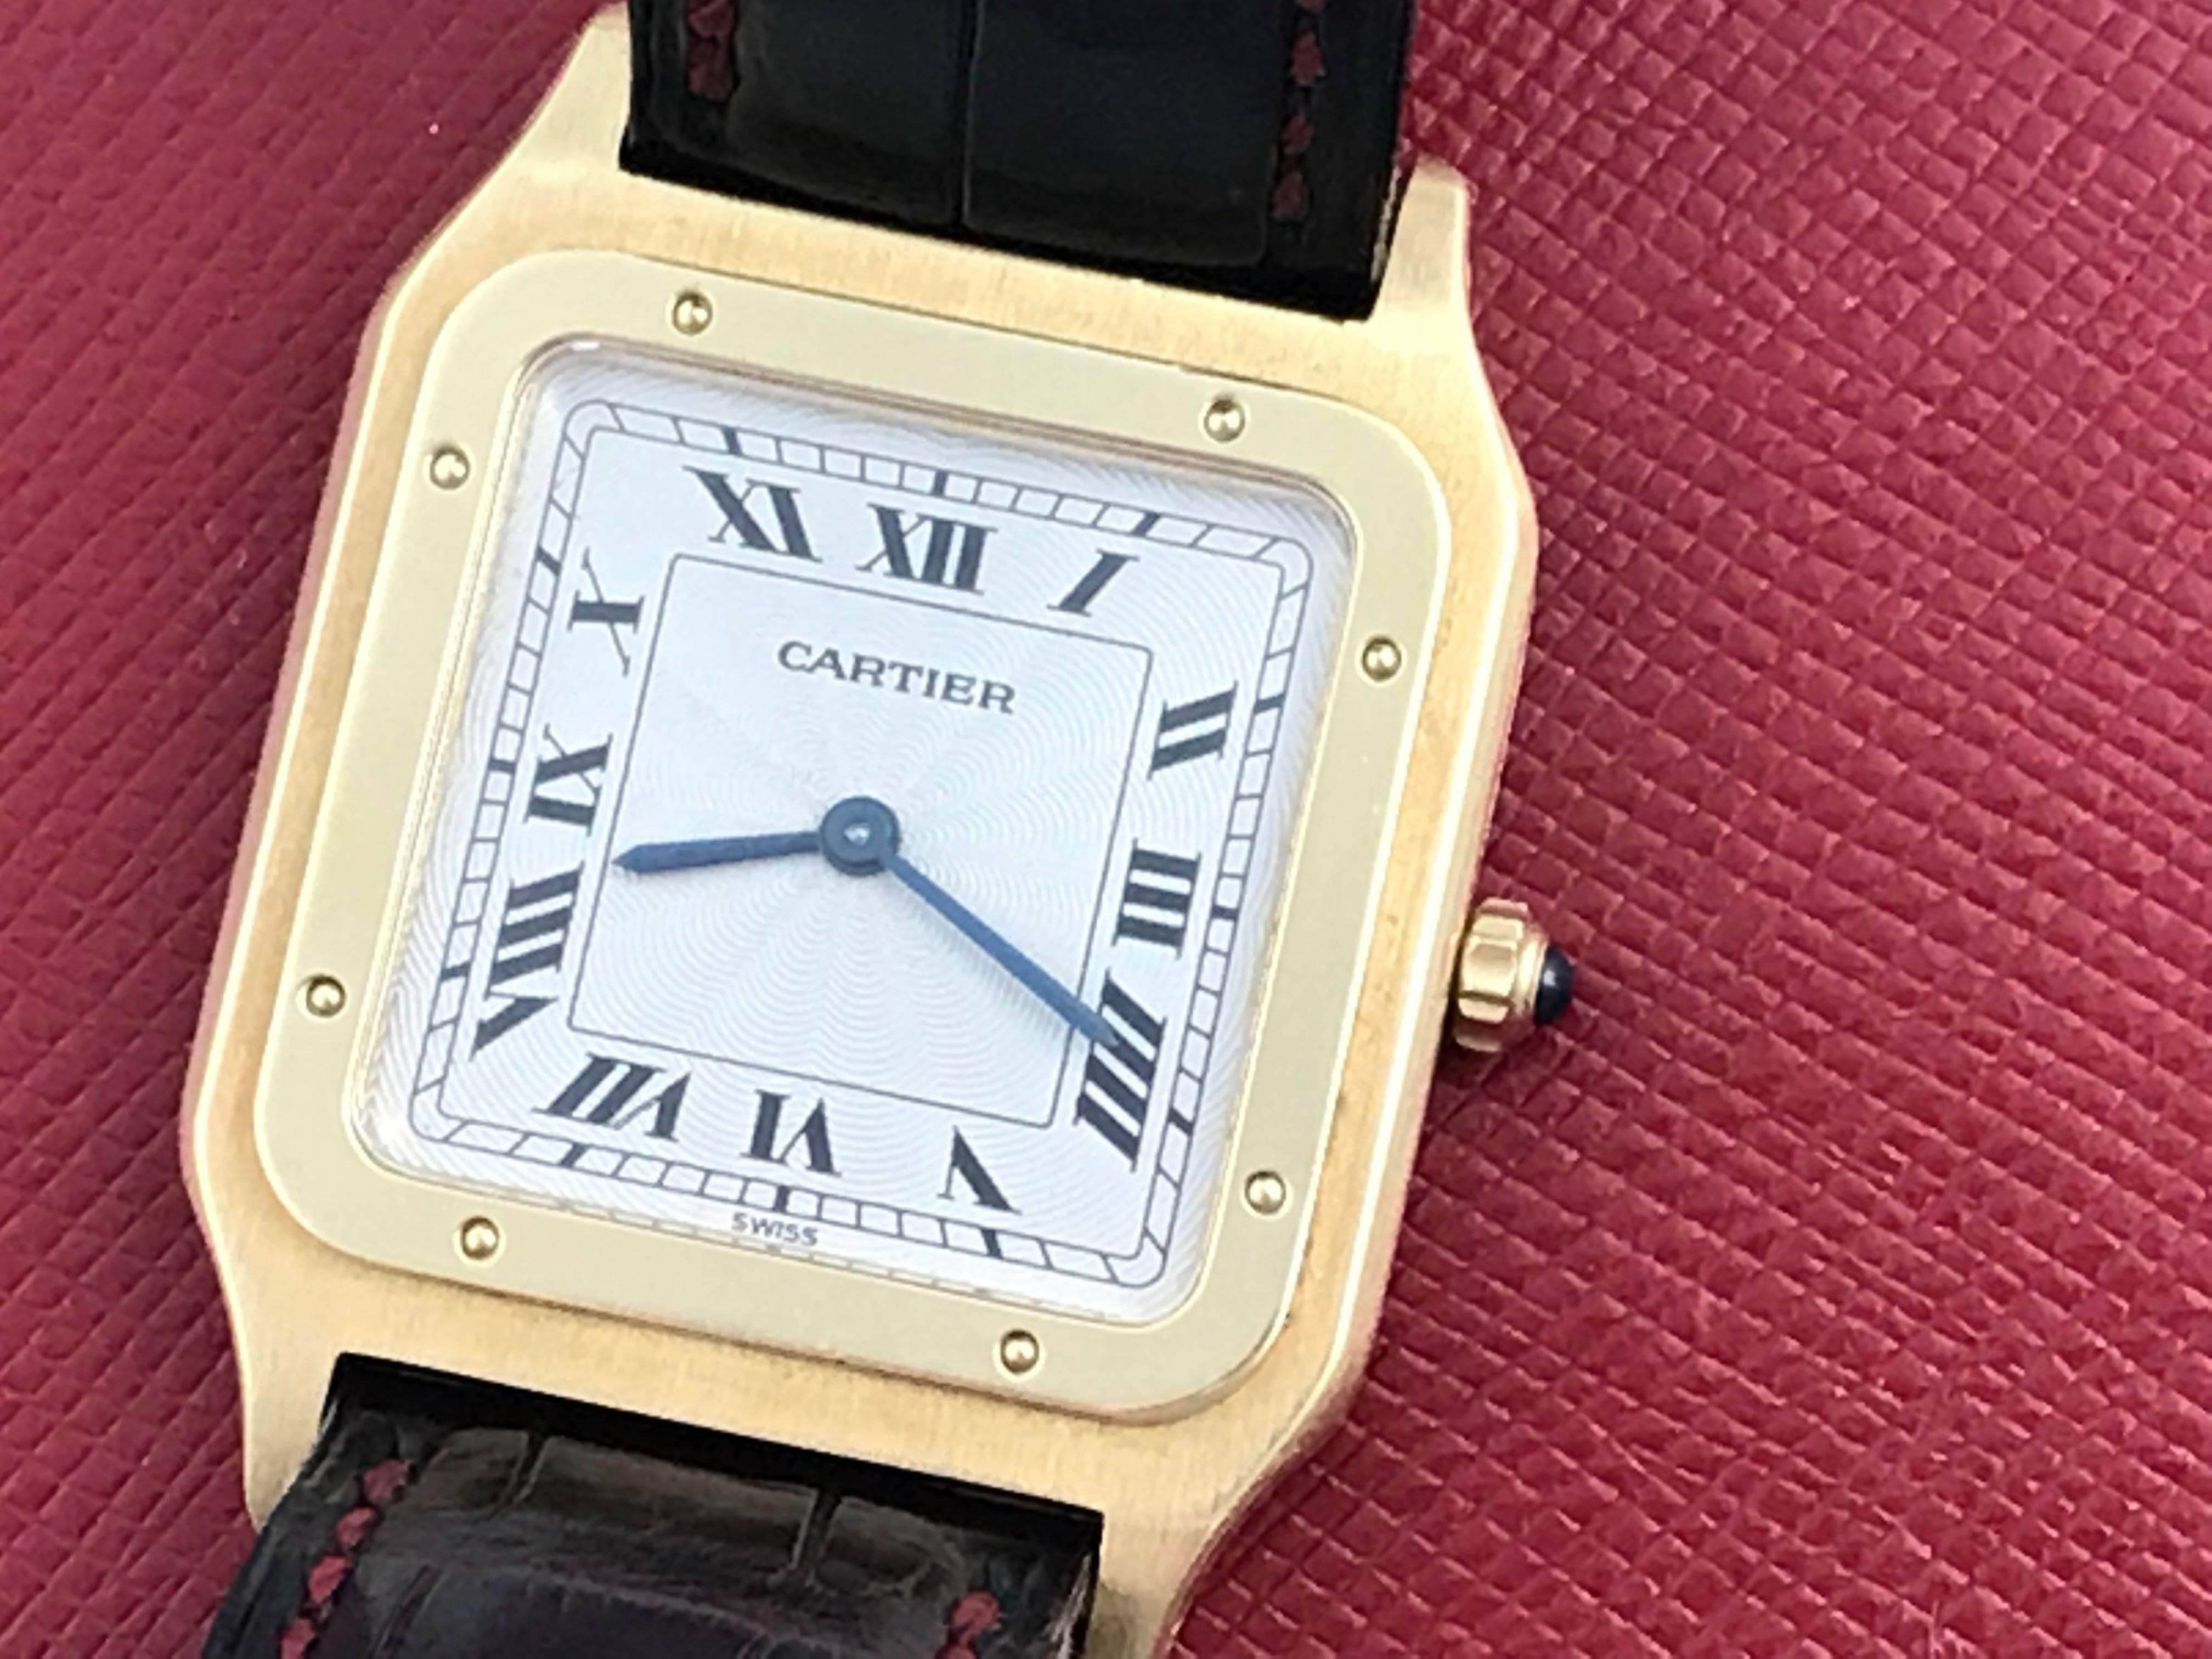 Manufacturer: Cartier
Model Name: Santos
Condition: Pre Owned
Watch Category: Contemporary
Gender: Midsize
Movement: Manual Winding
Dial: Silvered Dial with black Roman numerals
Case: 18k Yellow Gold square style case with Blue Sapphire cabachon